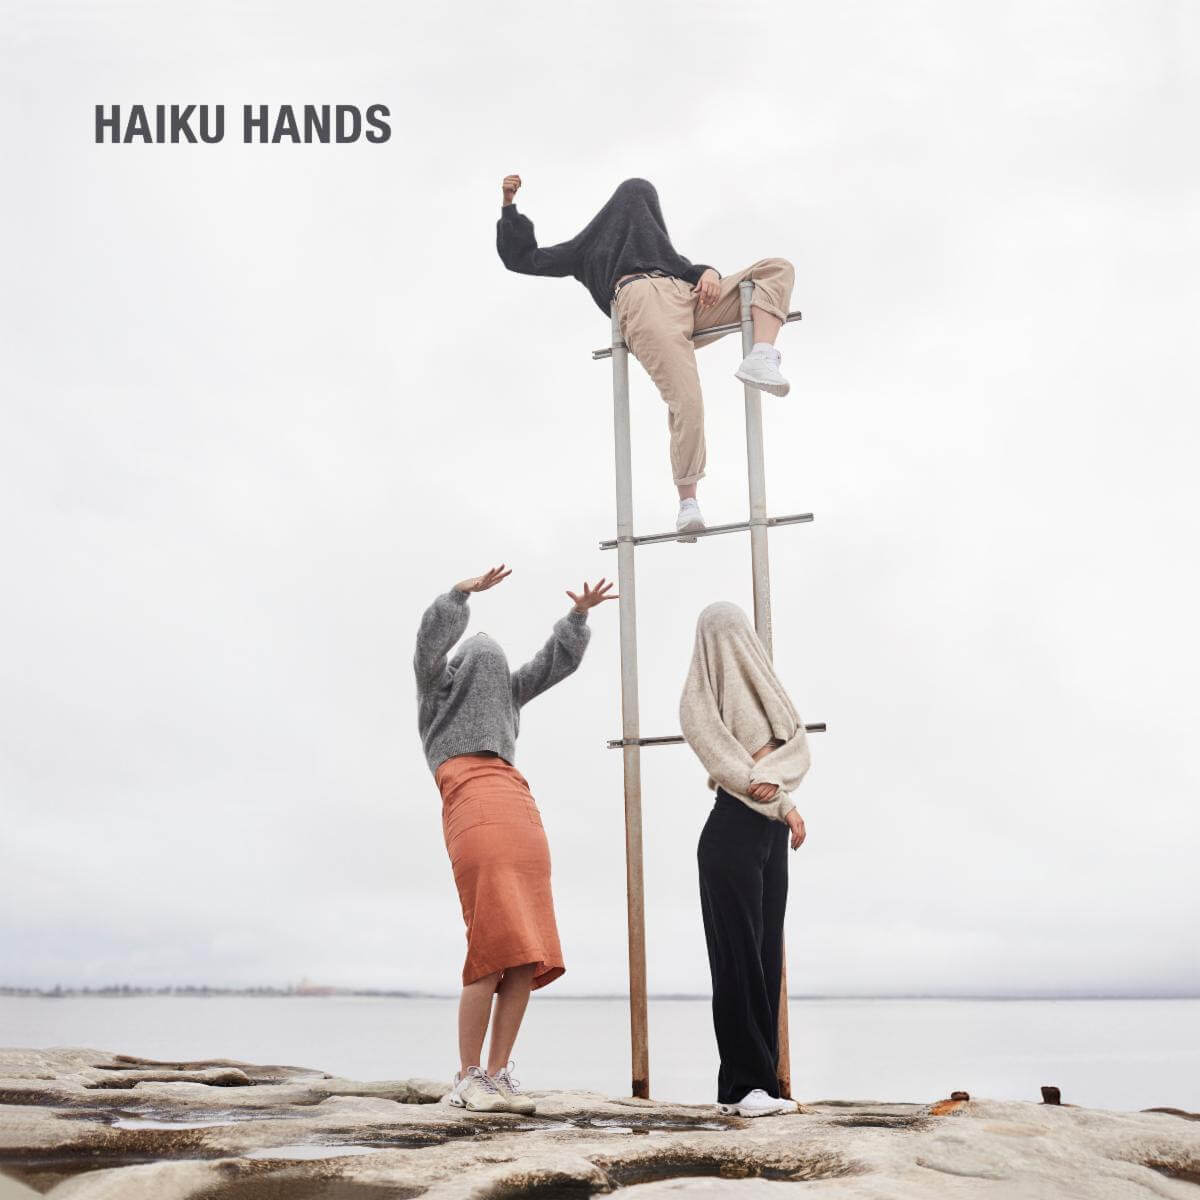 Haiku Hands recently released their self-titled LP on Mad Decent. Today, the trio have share their new single, “Suck My Cherry"